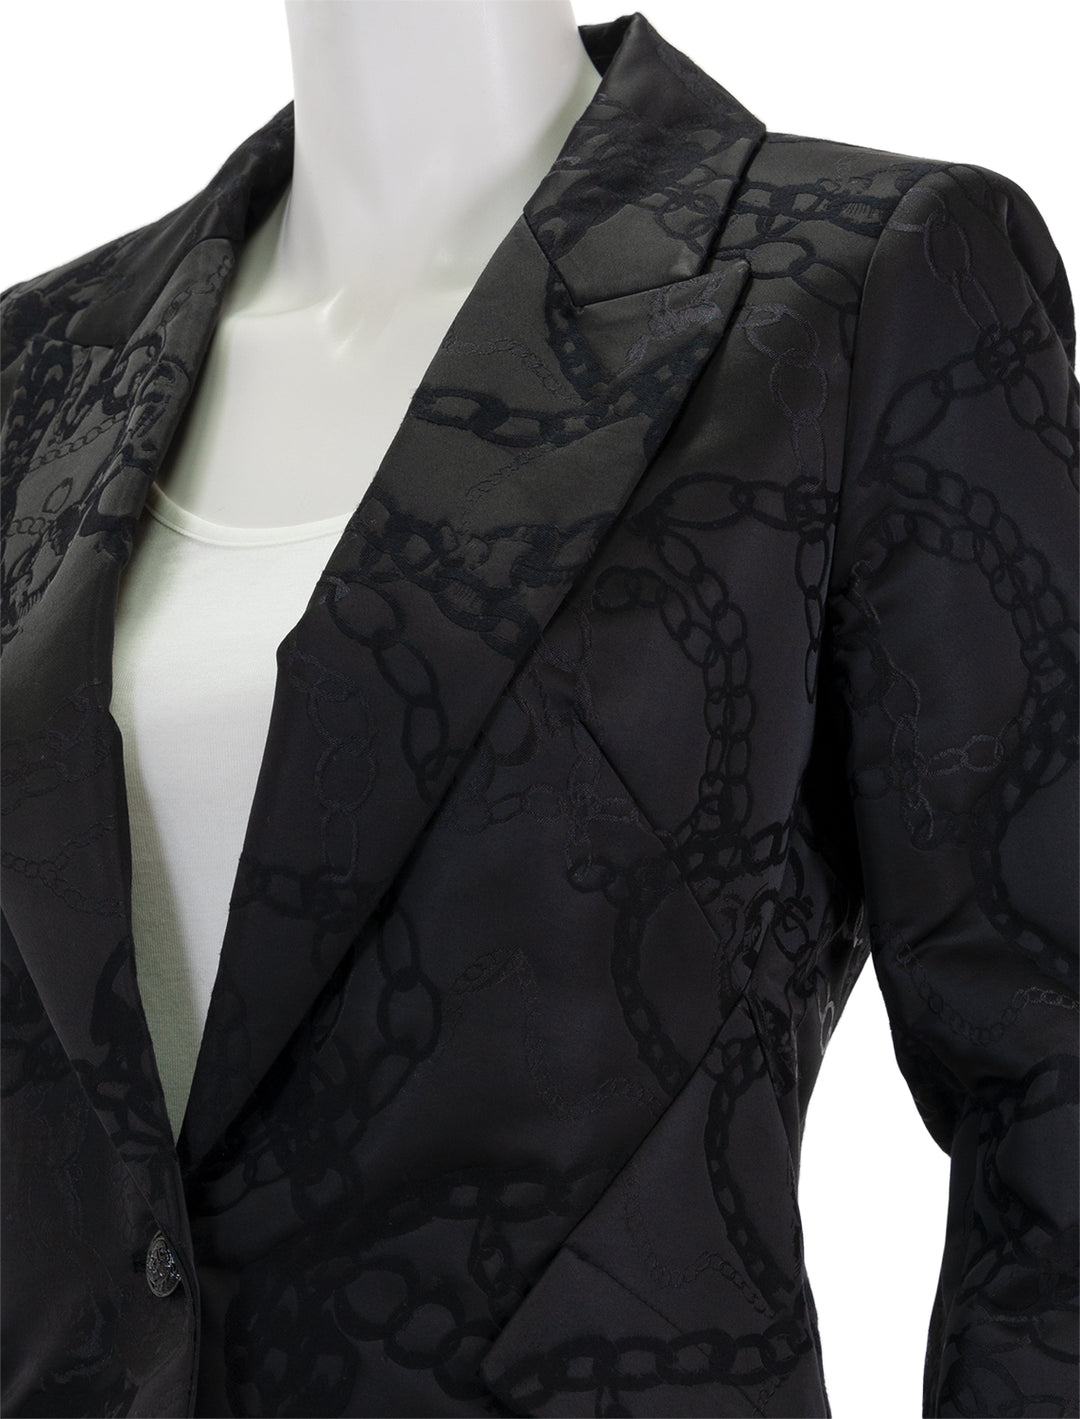 Close-up view of L'agence's chamberlin blazer in black multi chain.